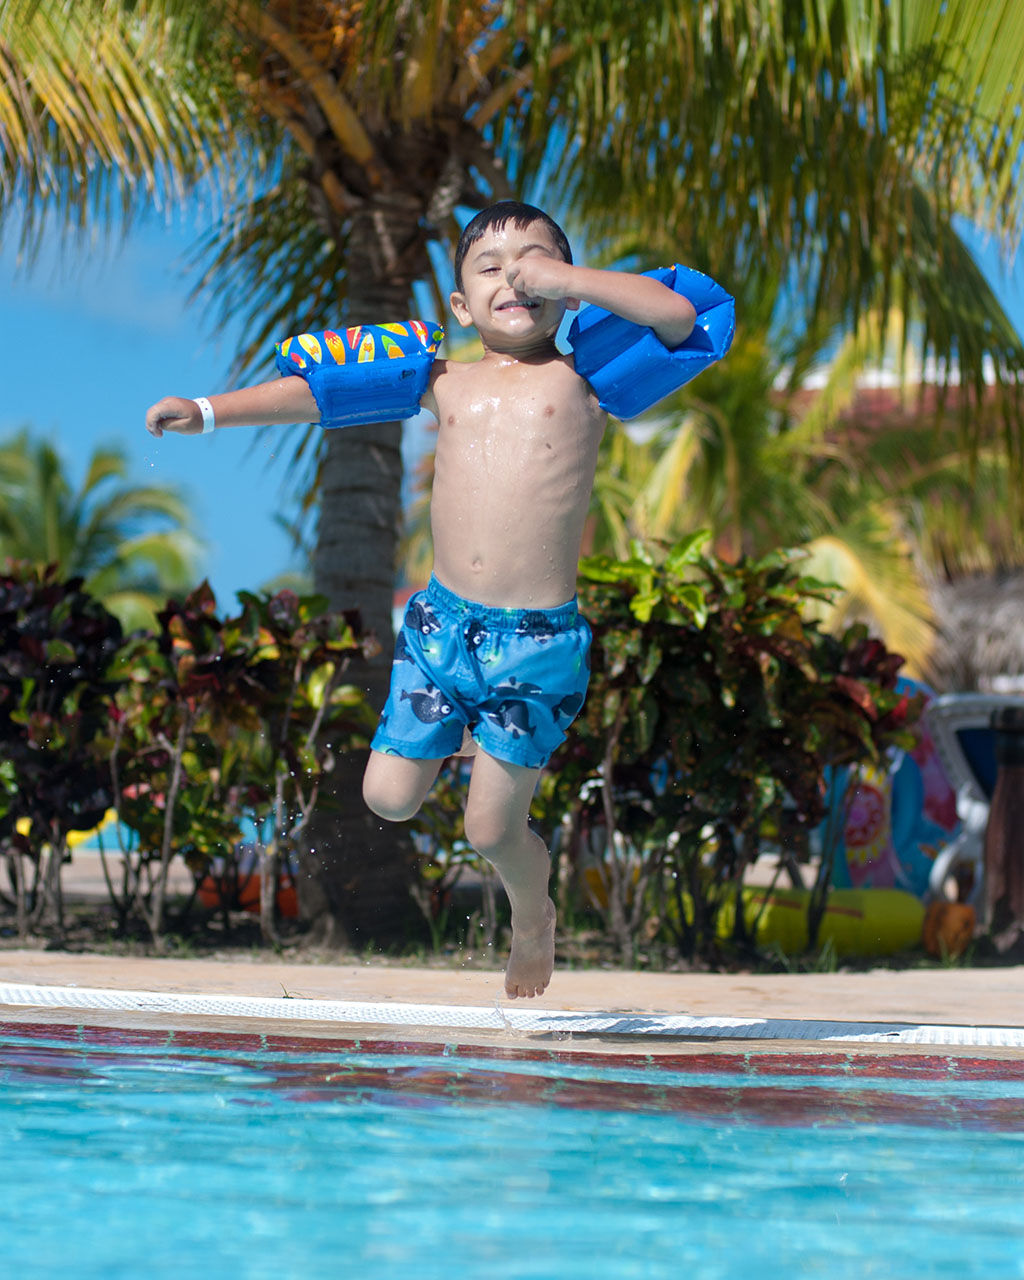 Bombs away! My four year old son, Joshua, jumping into the pool in Cuba. Photo courtesy Mike Macas, Technical Support Services